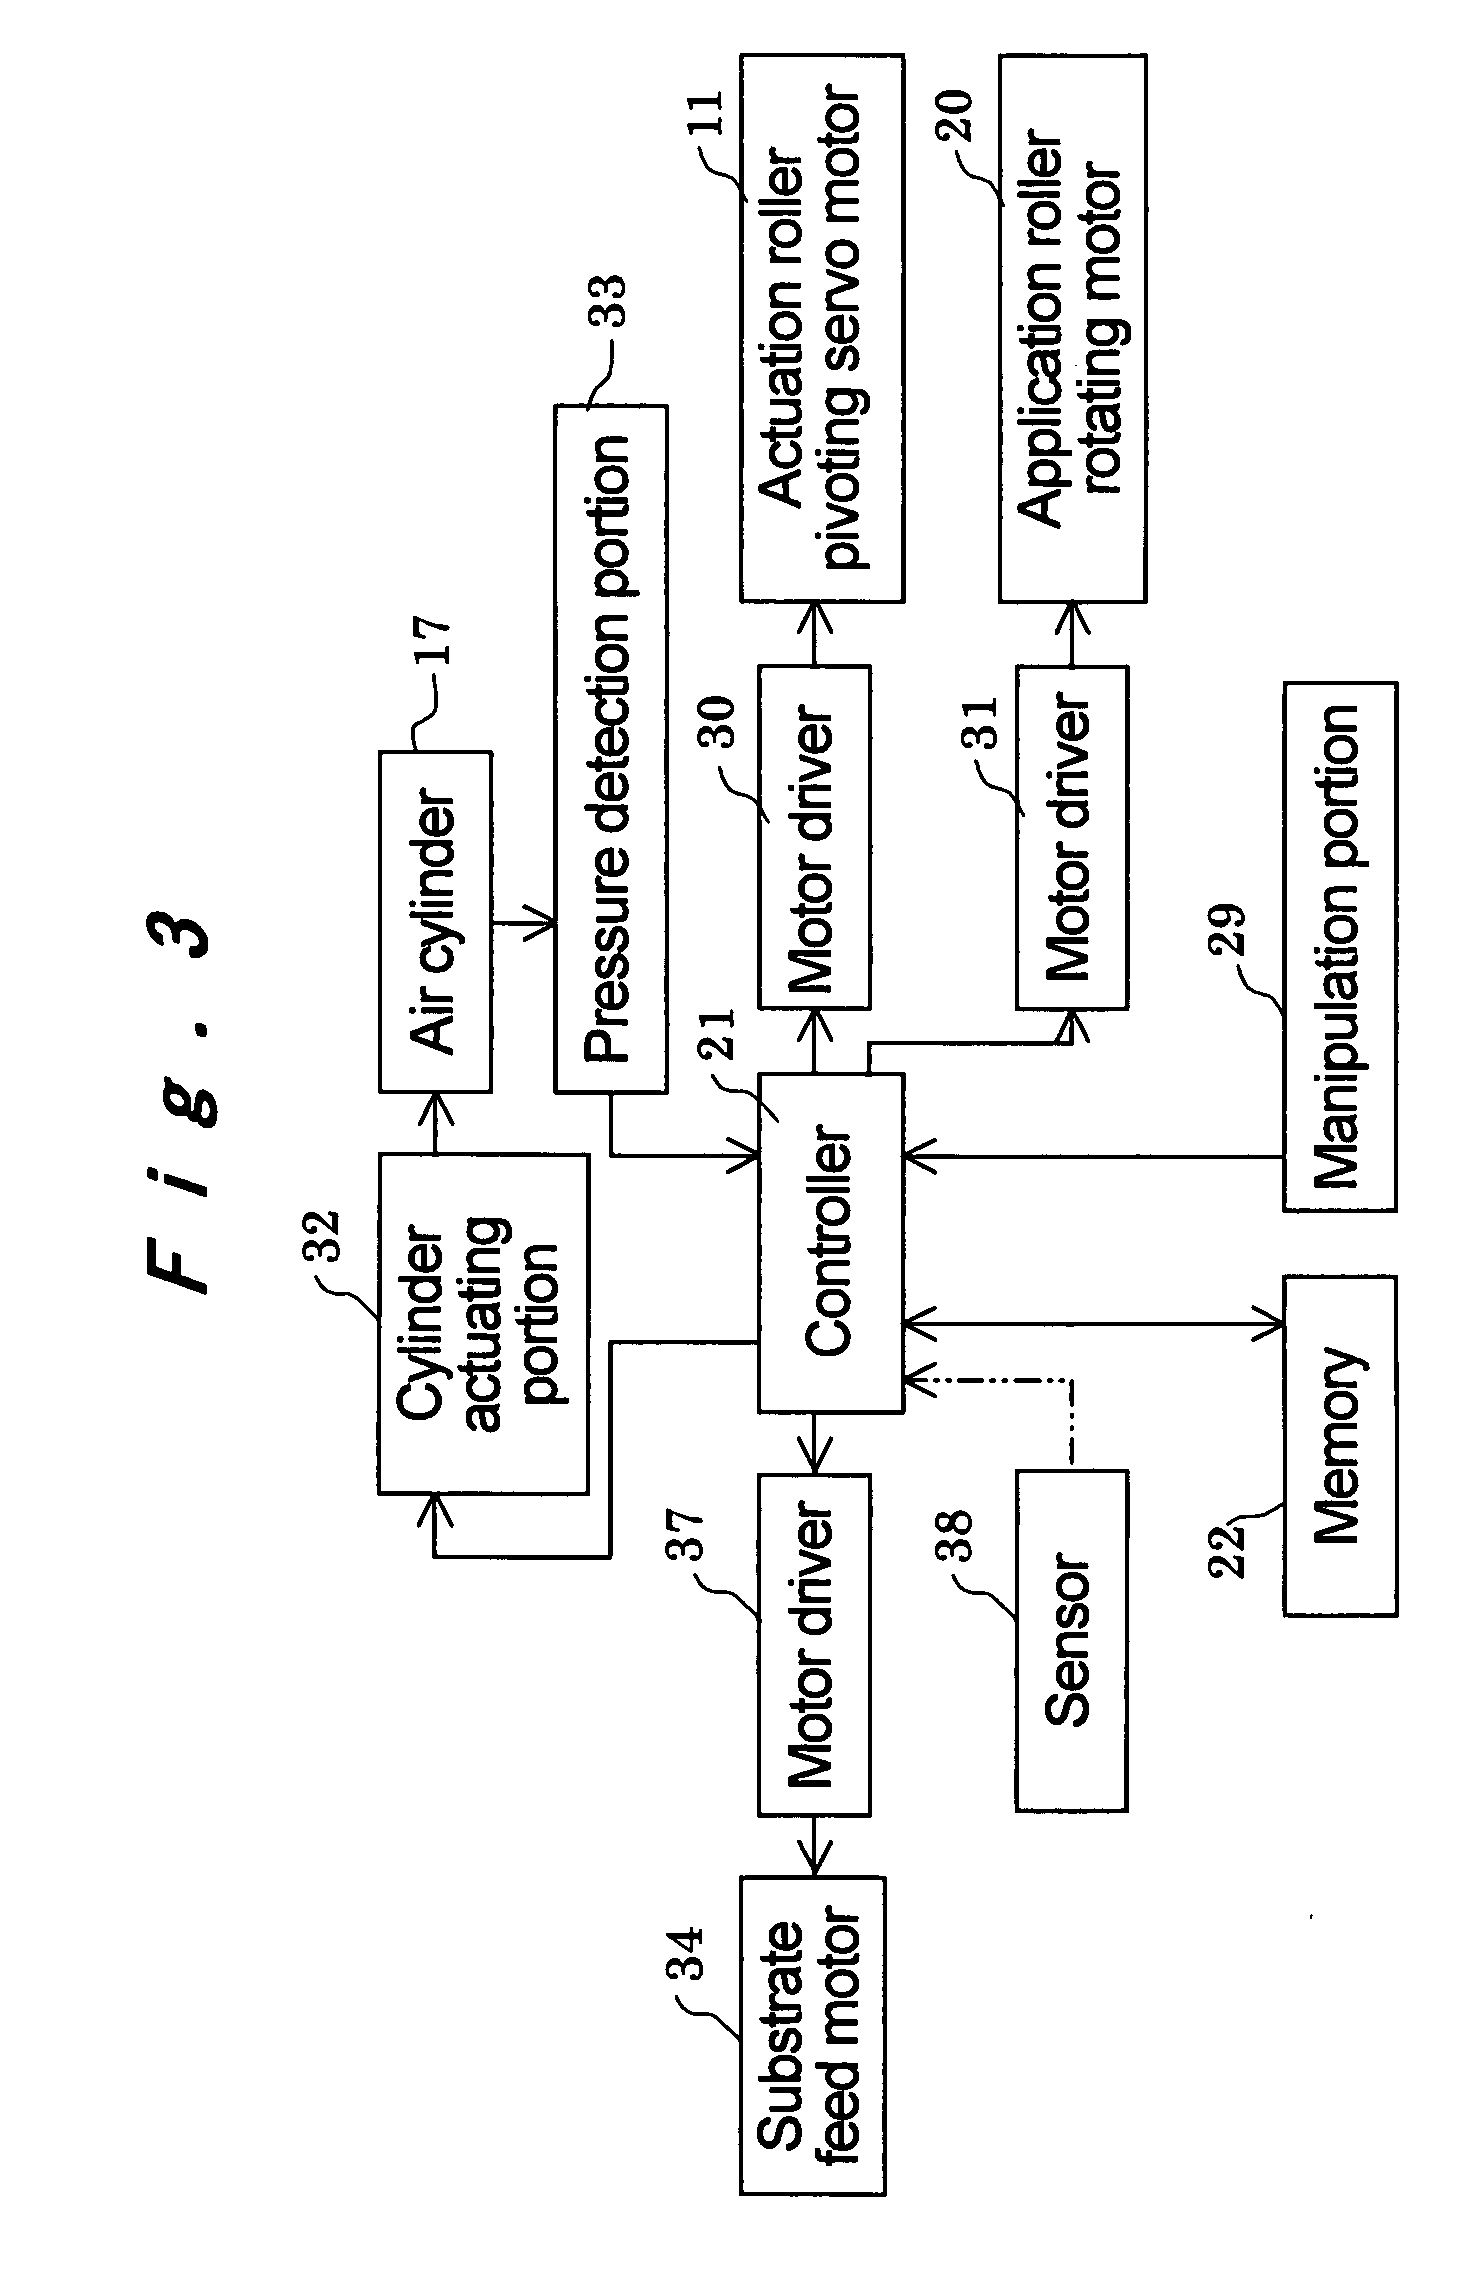 Method for intermittently applying thin-film coatings